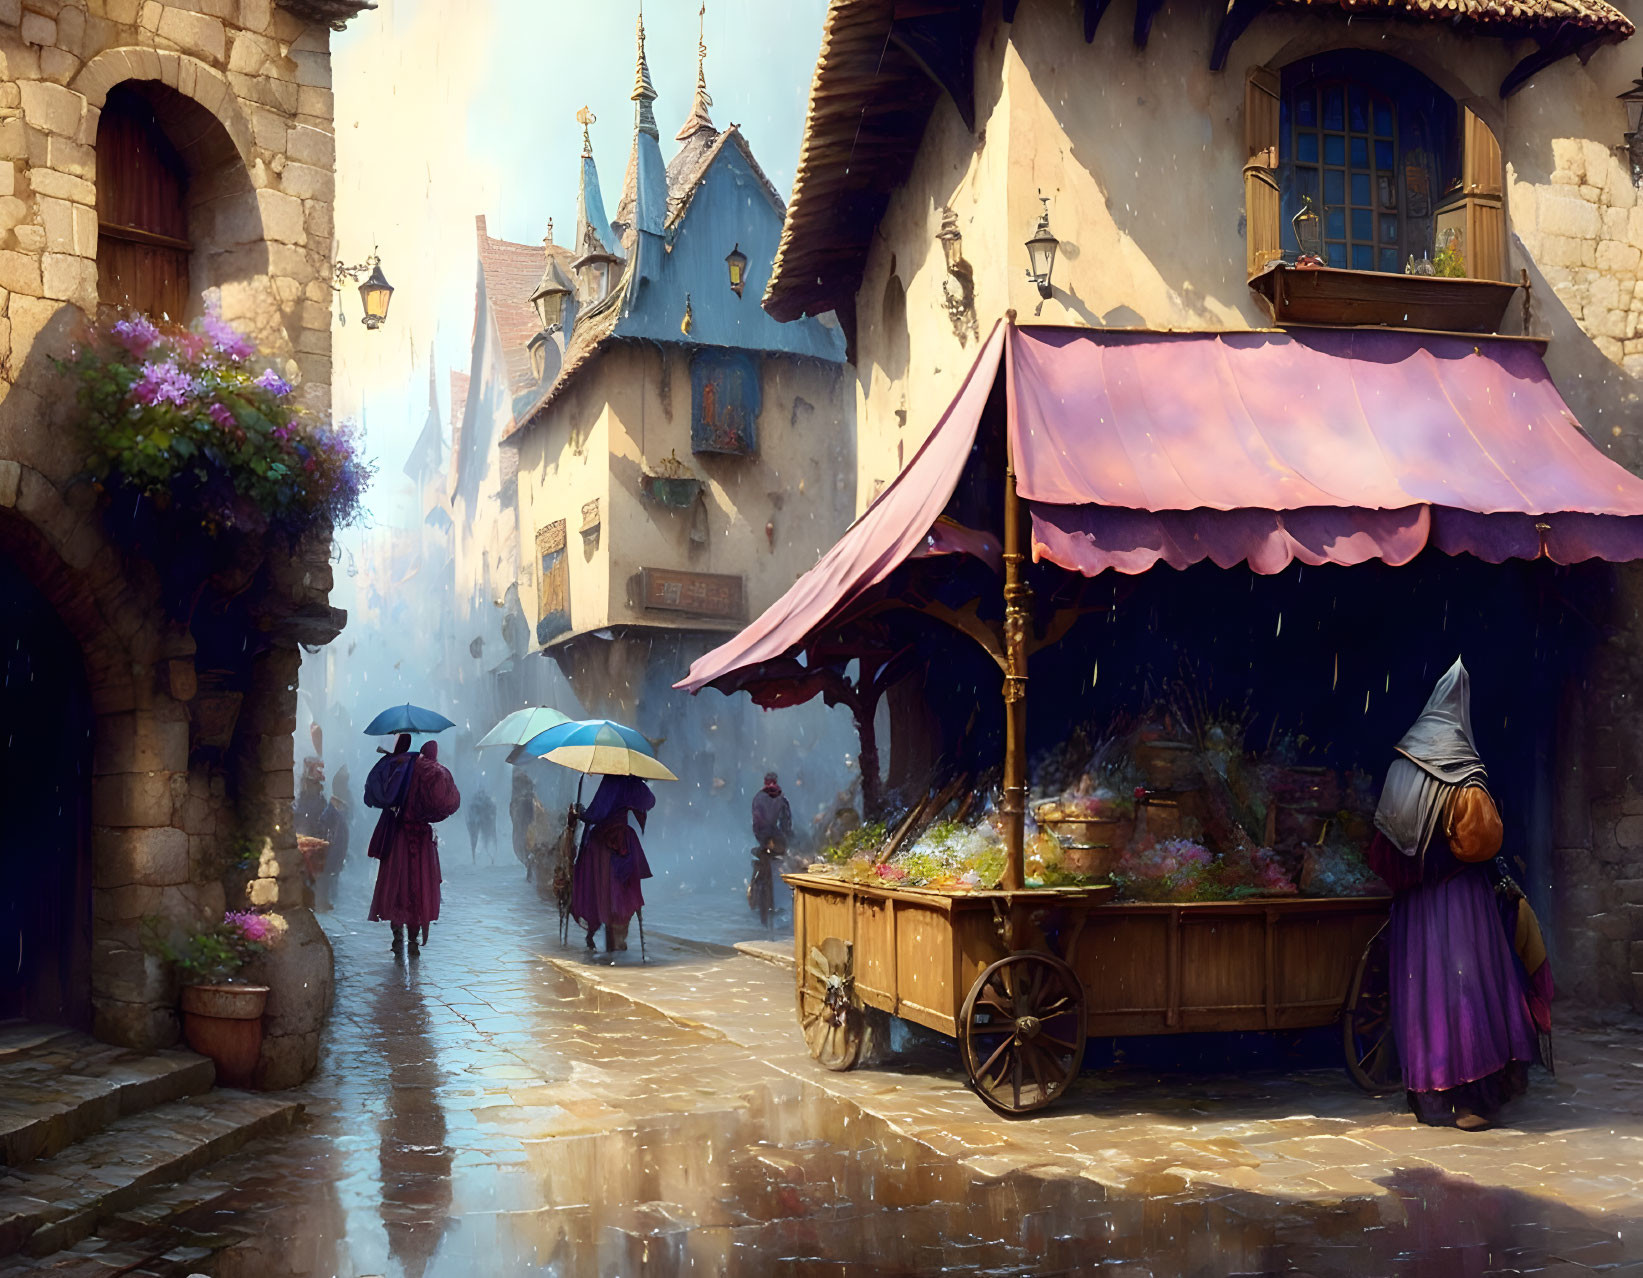 Medieval street scene with market stalls, umbrellas, and flower-adorned buildings